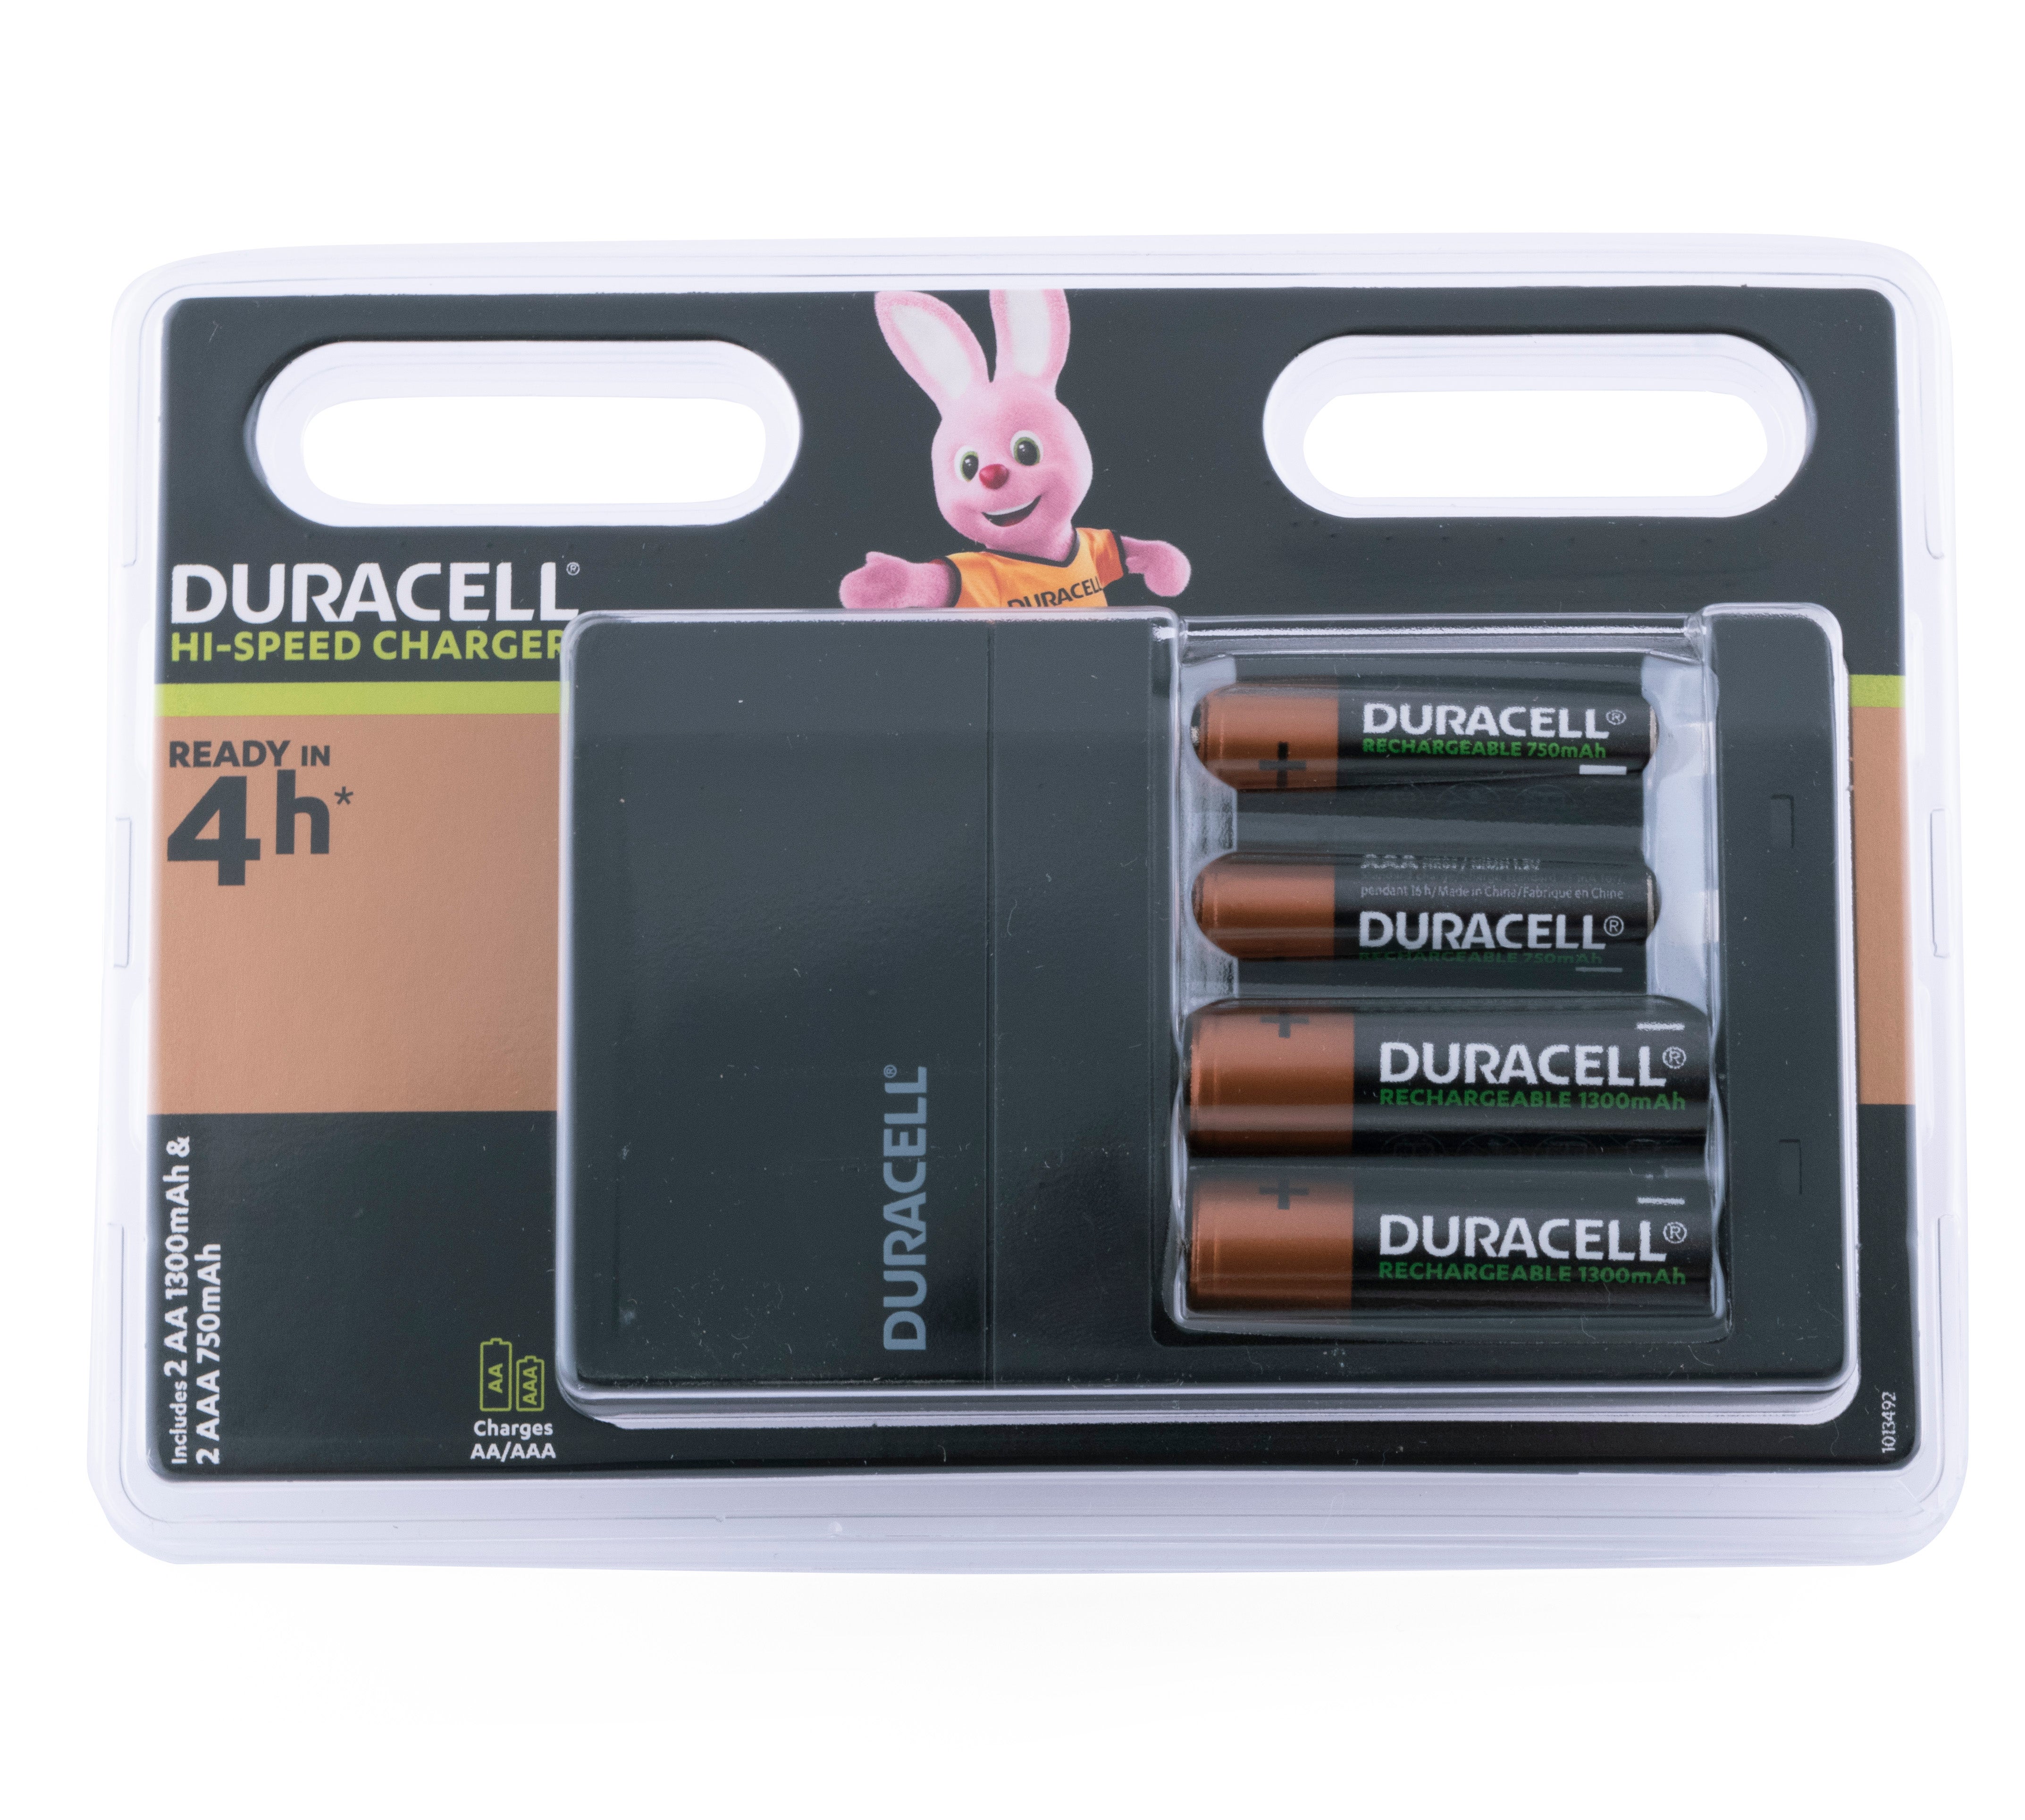 Duracell Caricabatterie compatto per 4 Pile Batterie Ricaricabili AA/AAA -  CEF14